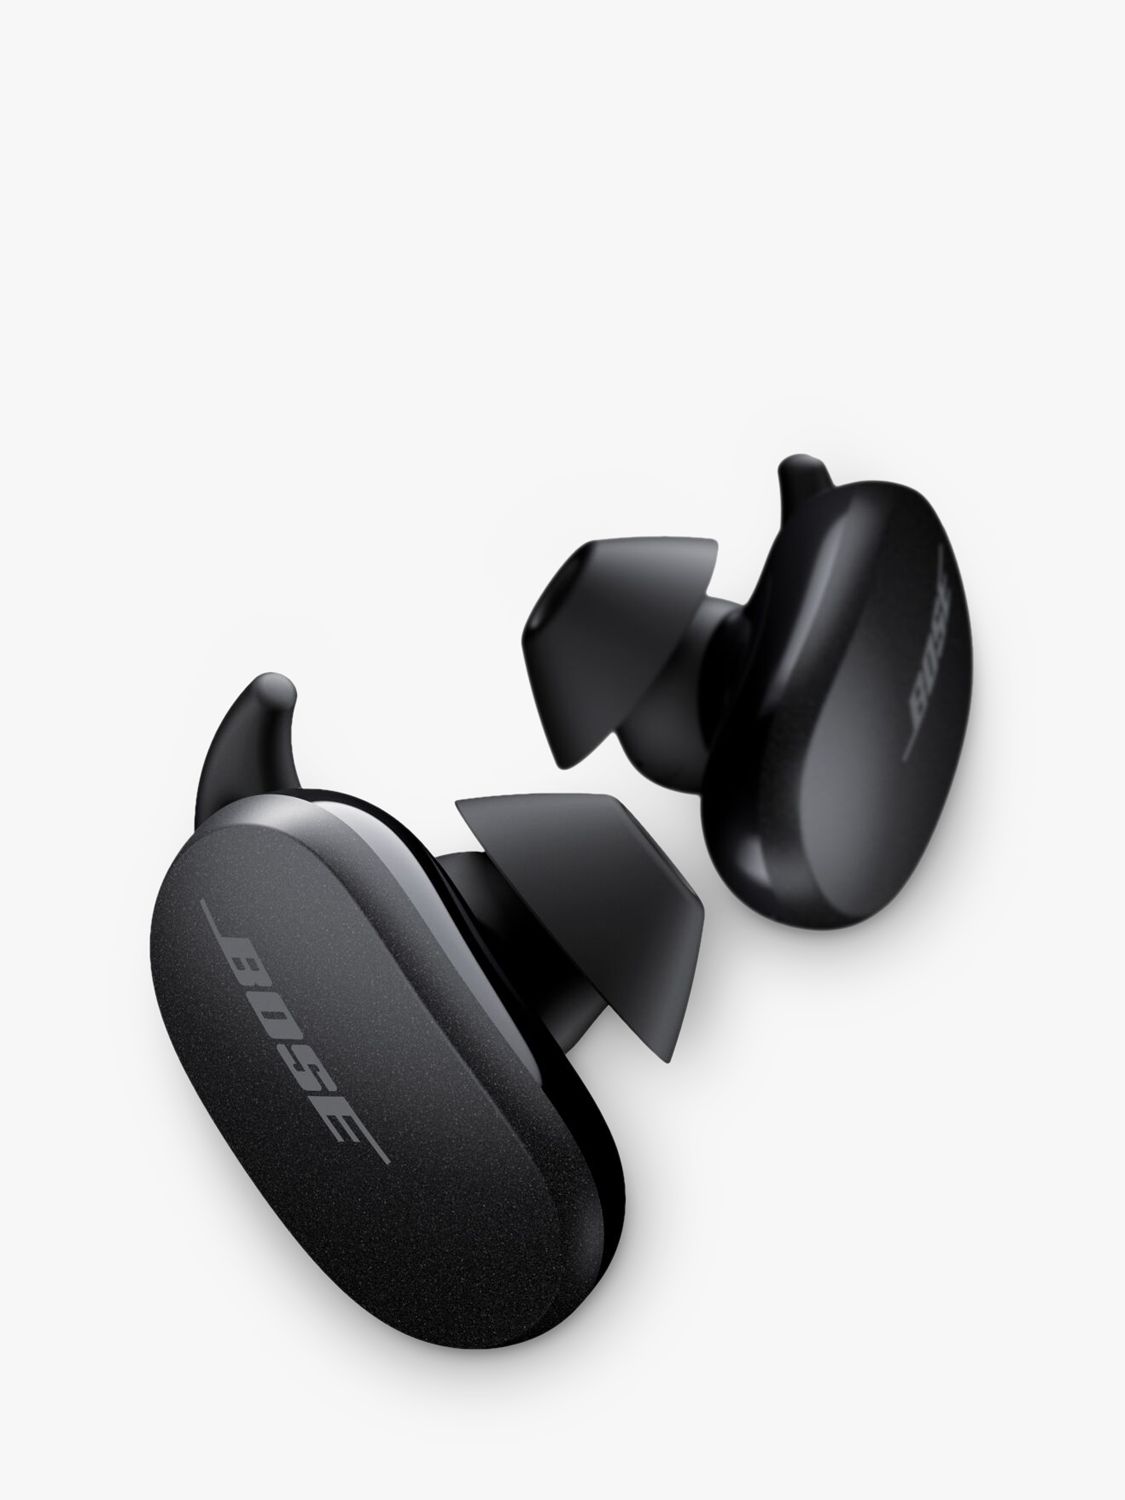 Bose QuietComfort Earbuds Noise Cancelling True Wireless Sweat   Weather-Resistant Bluetooth In-Ear Headphones with